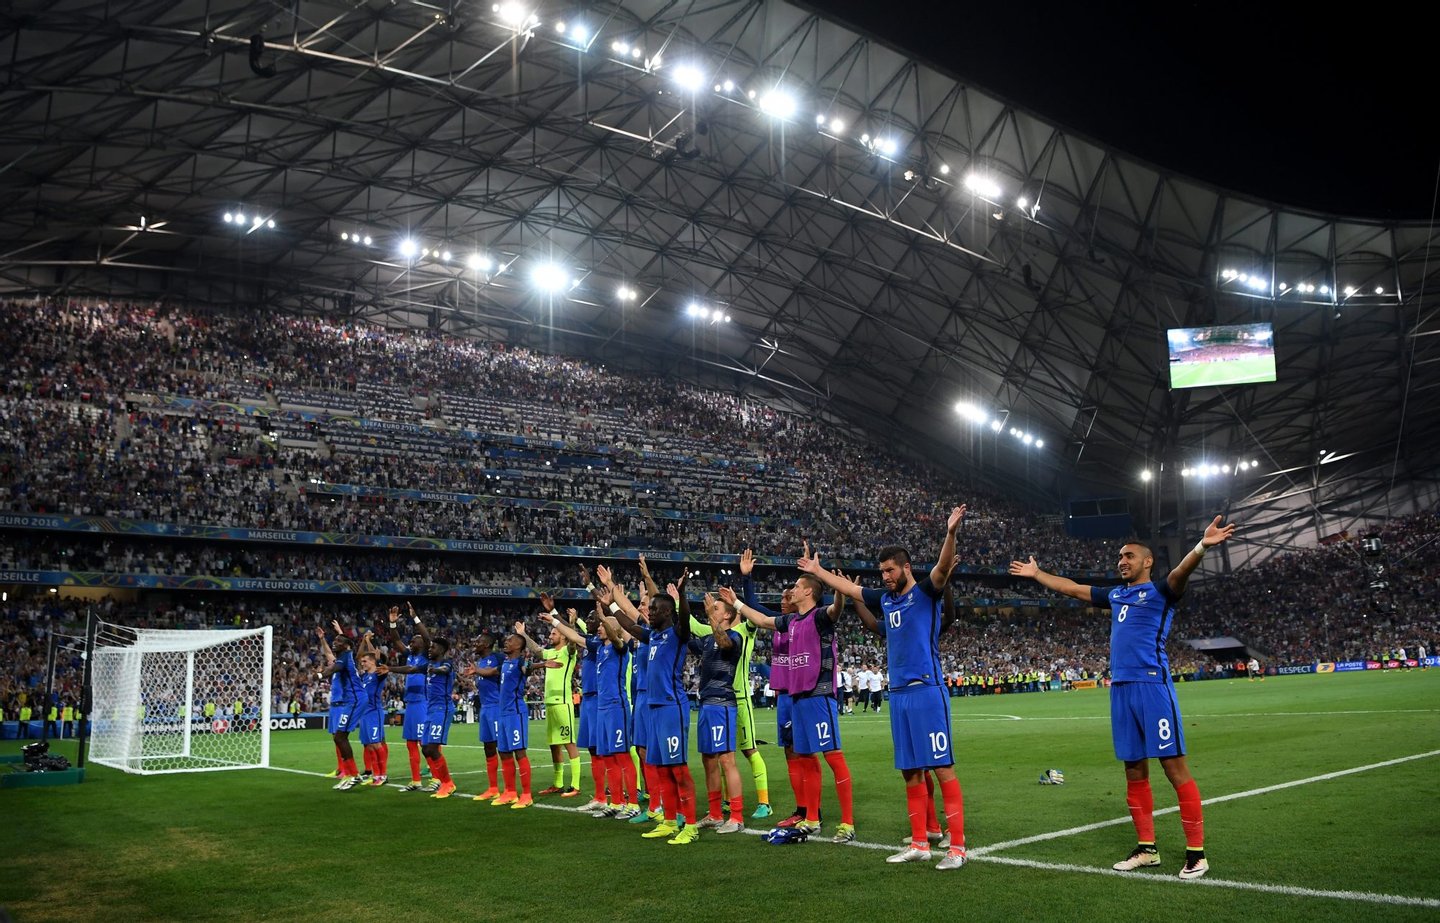 MARSEILLE, FRANCE - JULY 07:  France players celebrate their team's 2-0 win in the UEFA EURO semi final match between Germany and France at Stade Velodrome on July 7, 2016 in Marseille, France.  (Photo by Matthias Hangst/Getty Images)